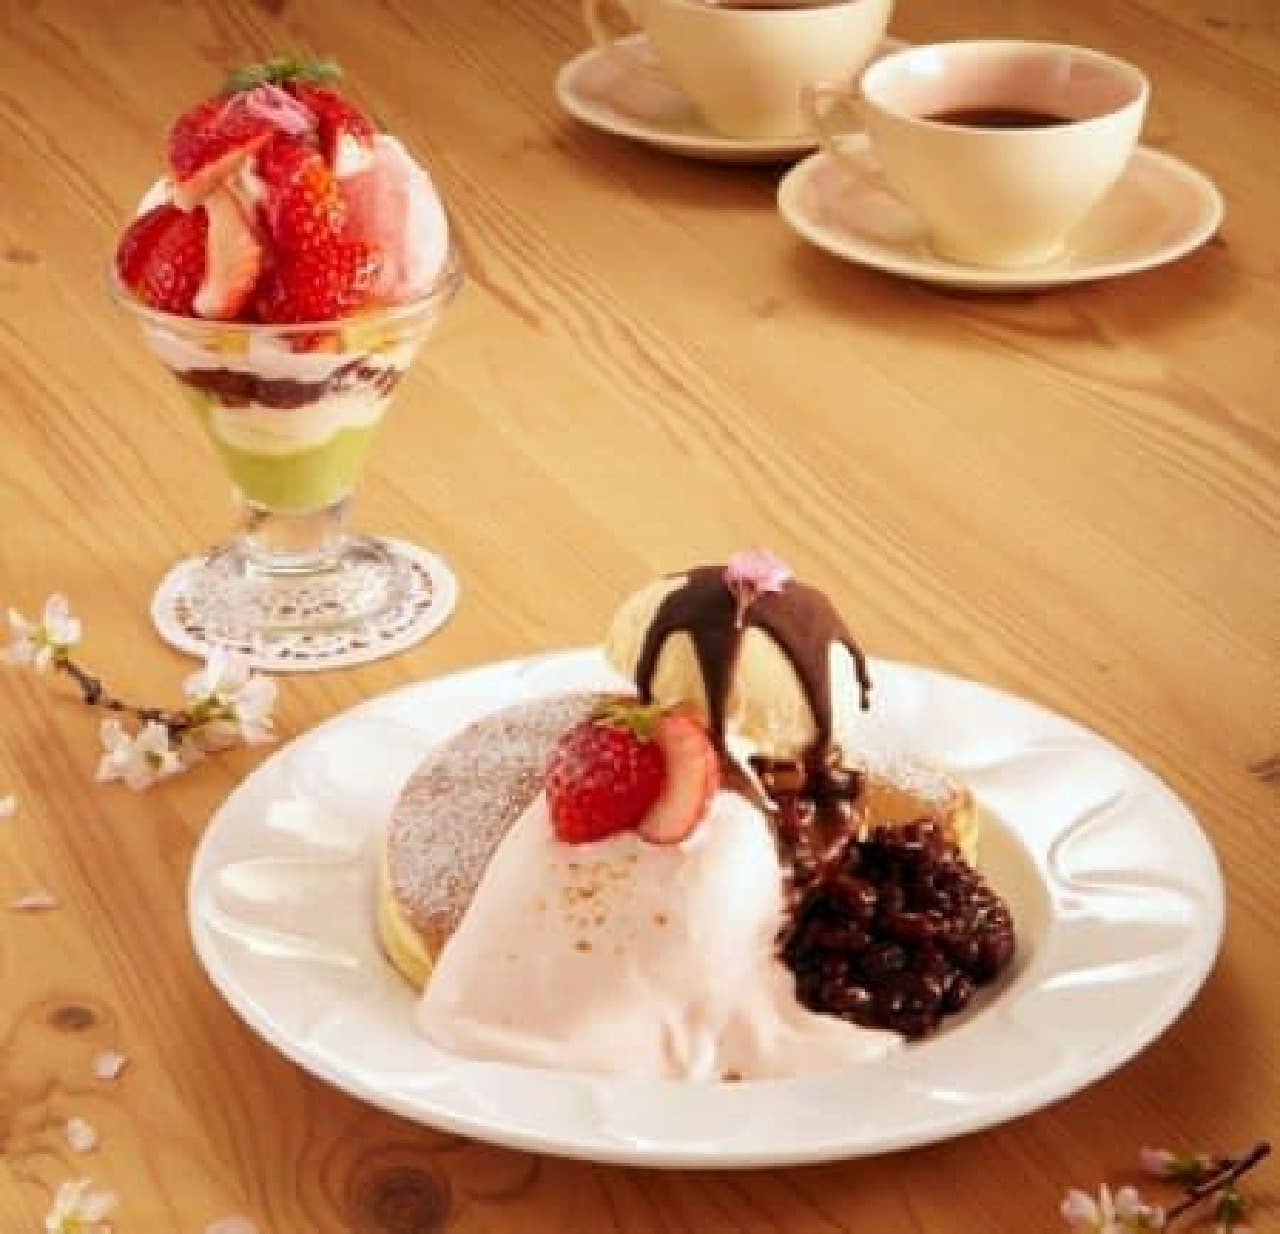 Will cherry blossoms bloom on pancakes? Denny's new dessert!